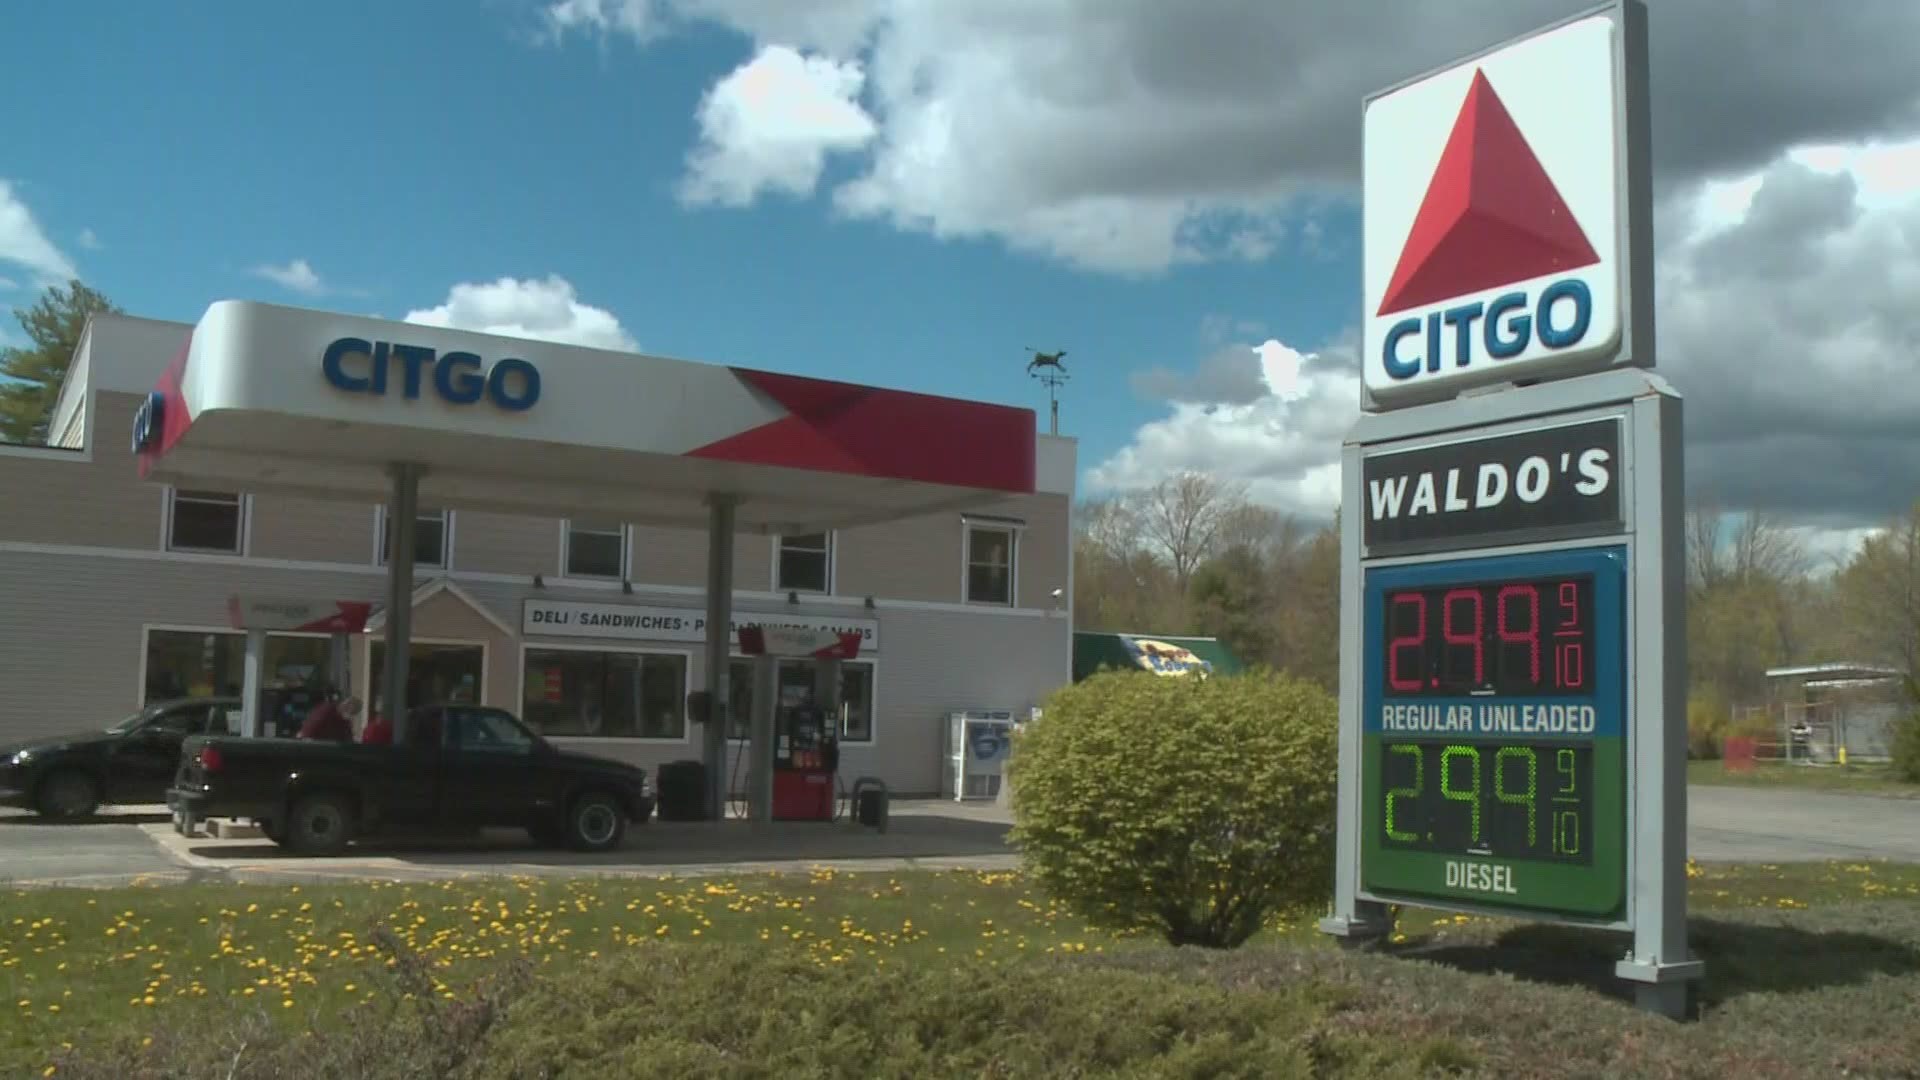 While gas prices are on the rise here in Maine, AAA says it's not because of the ransomware attack on the colonial pipeline.